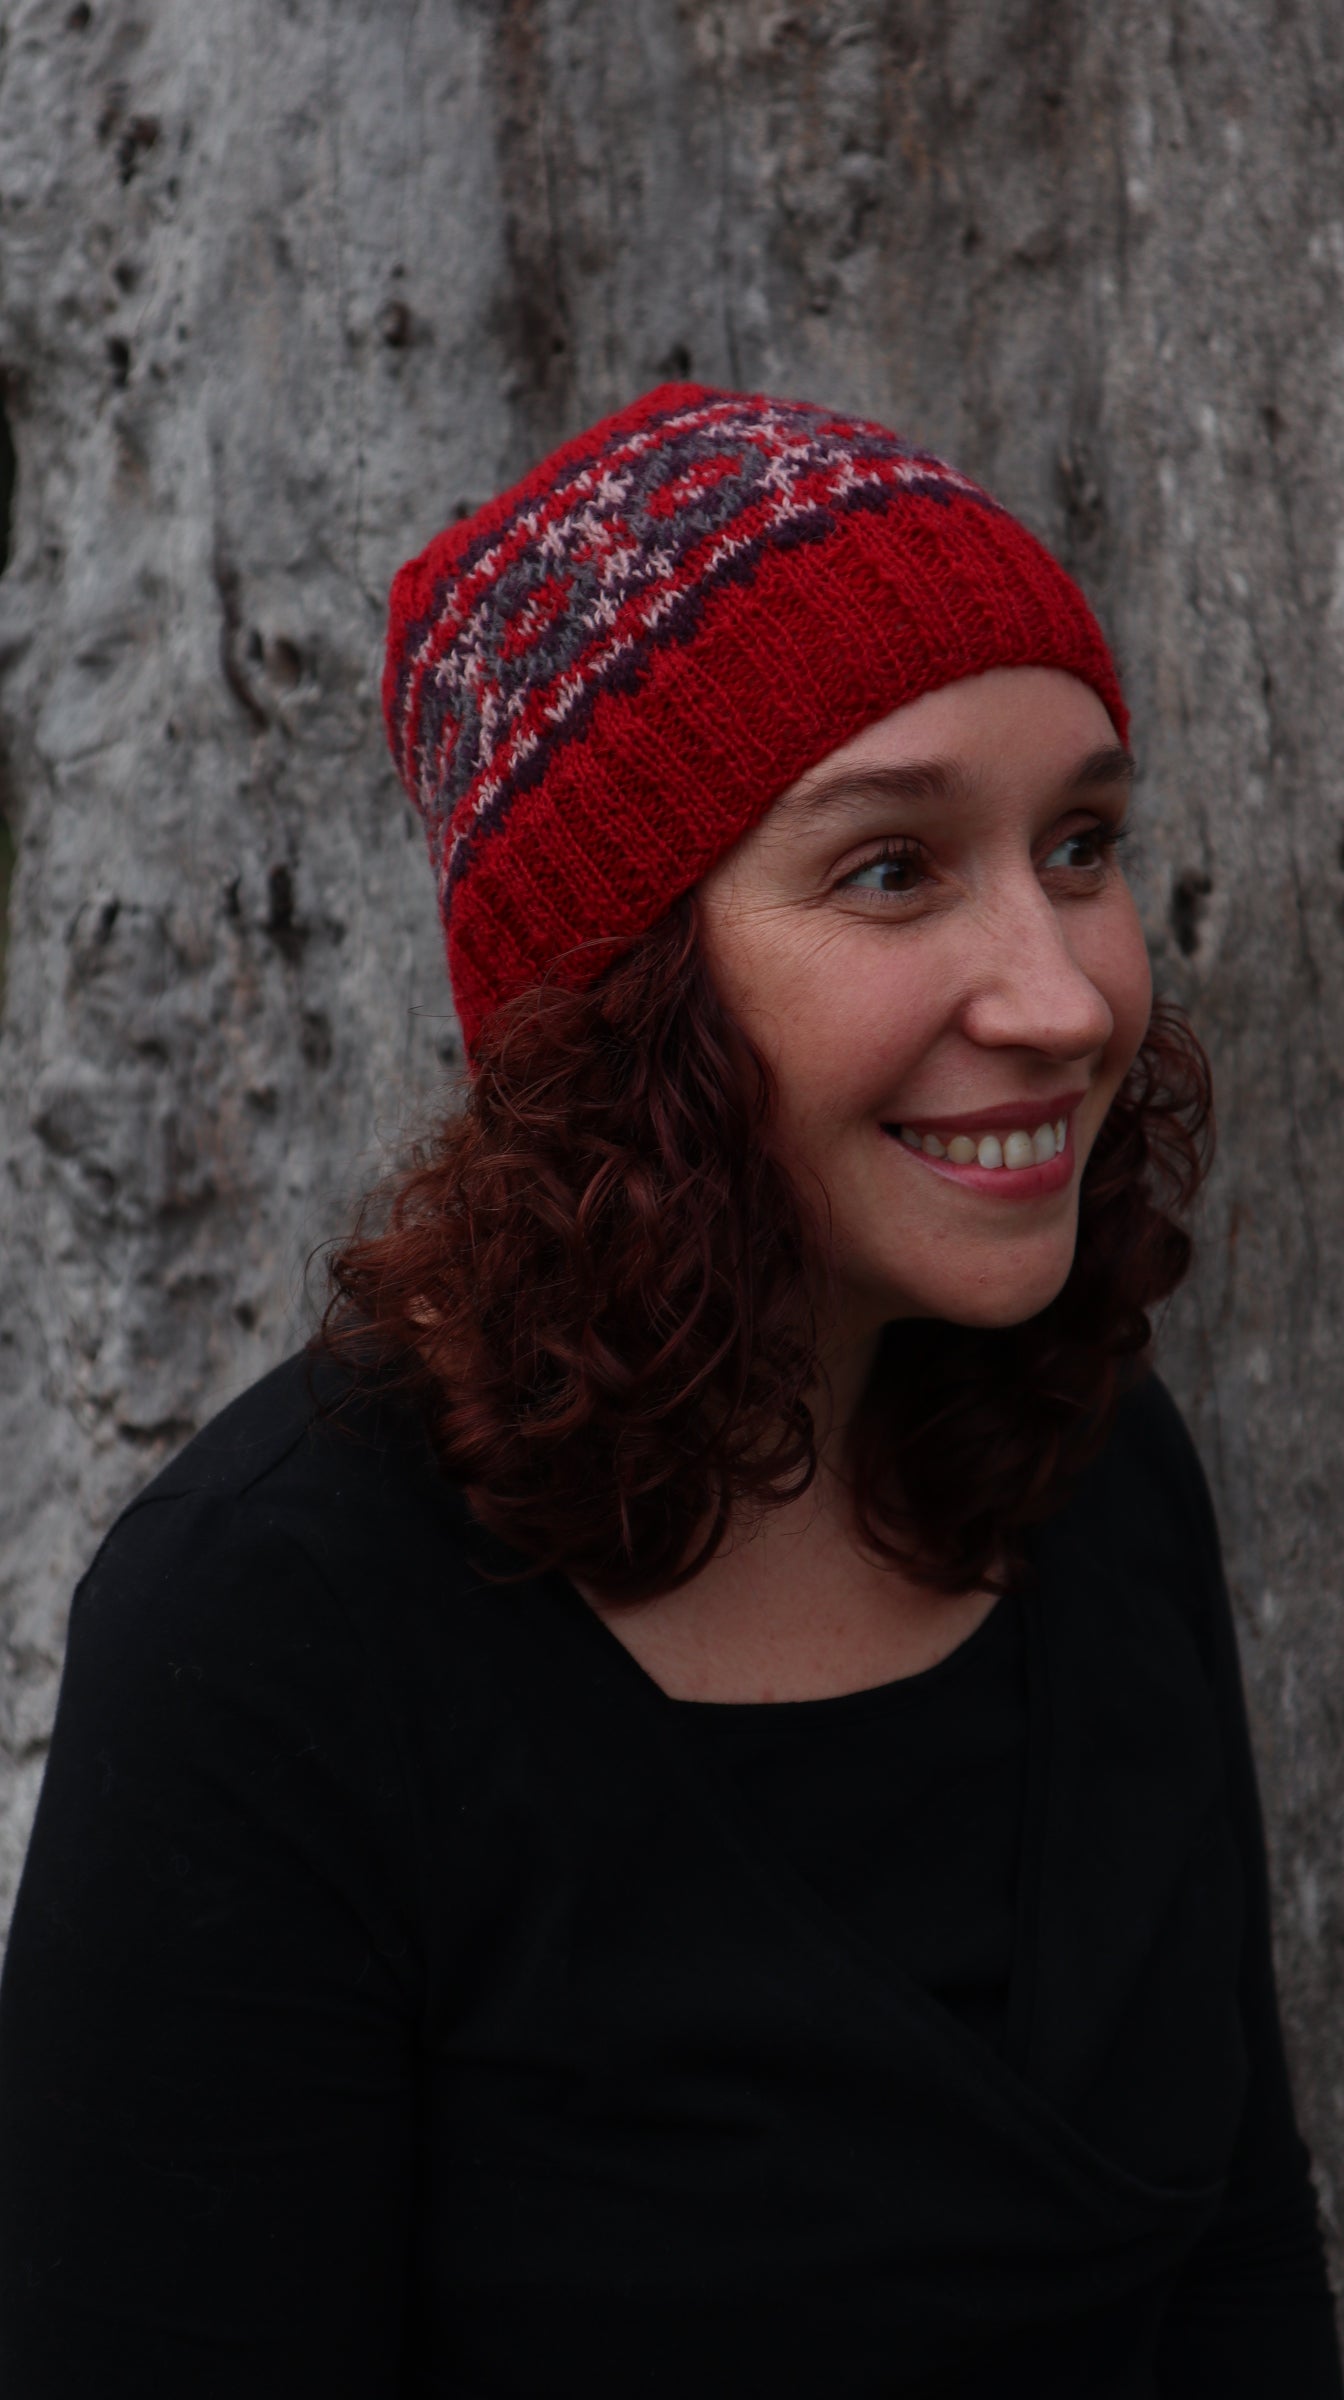 Fair Trade Ethical Woollen Beanie in Patterned Design